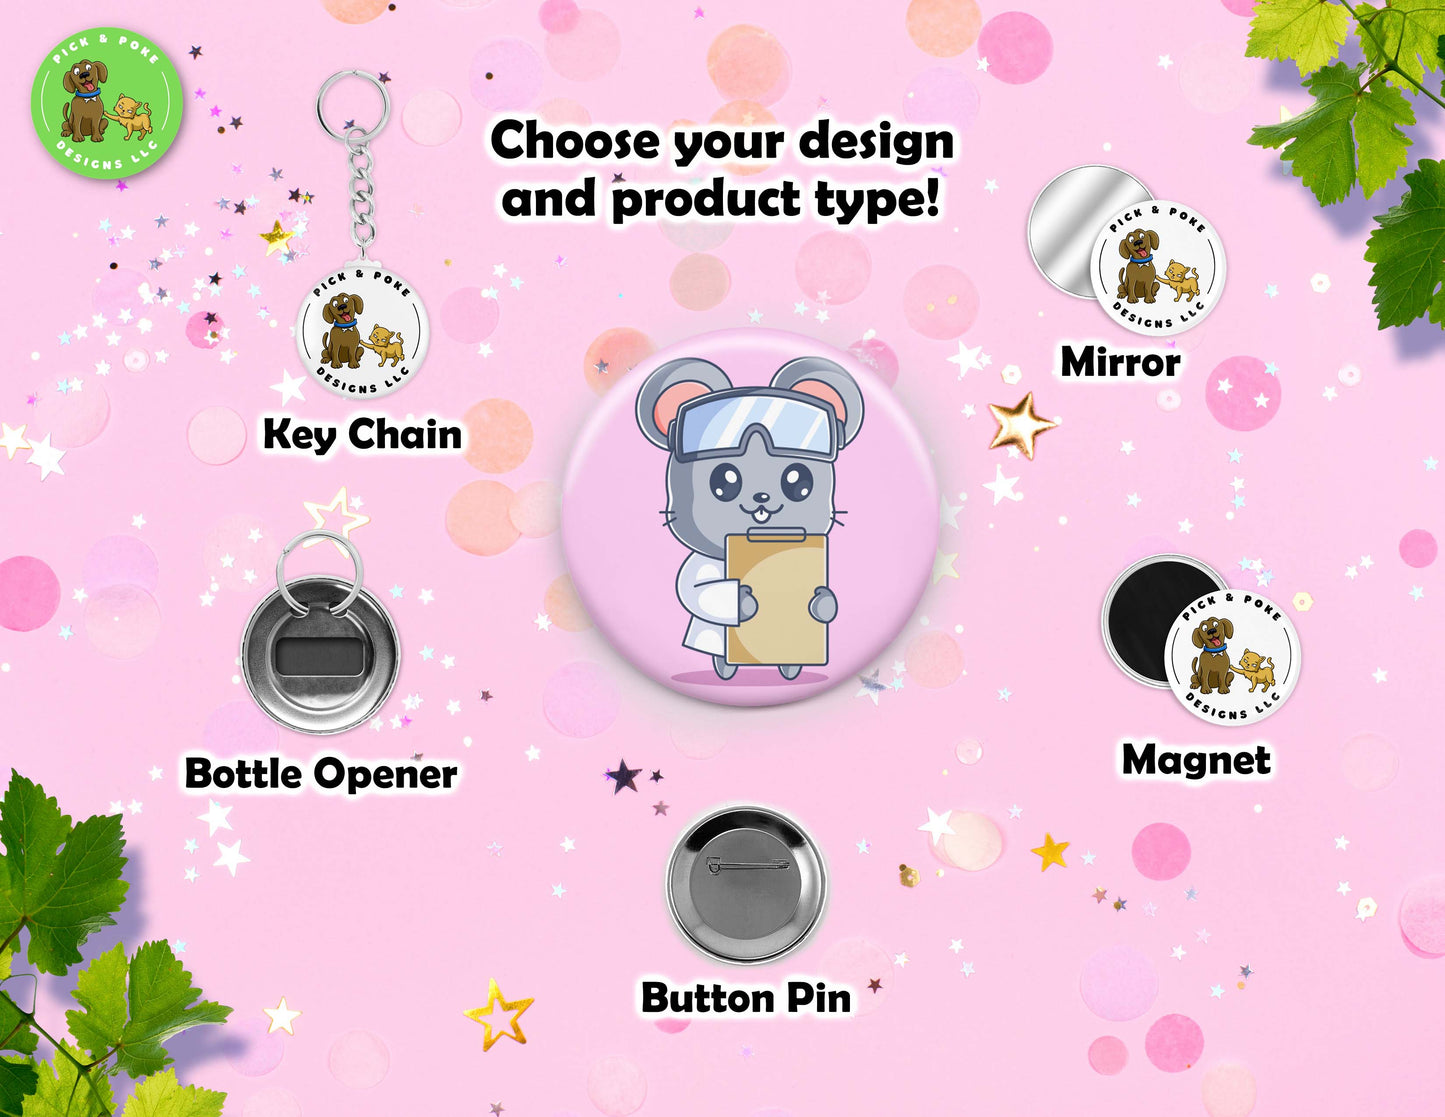 Cute Mouse Scientist | Button Pin, Key Chain, Magnet, Bottle Opener, or Mirror | 2.25-inch Size